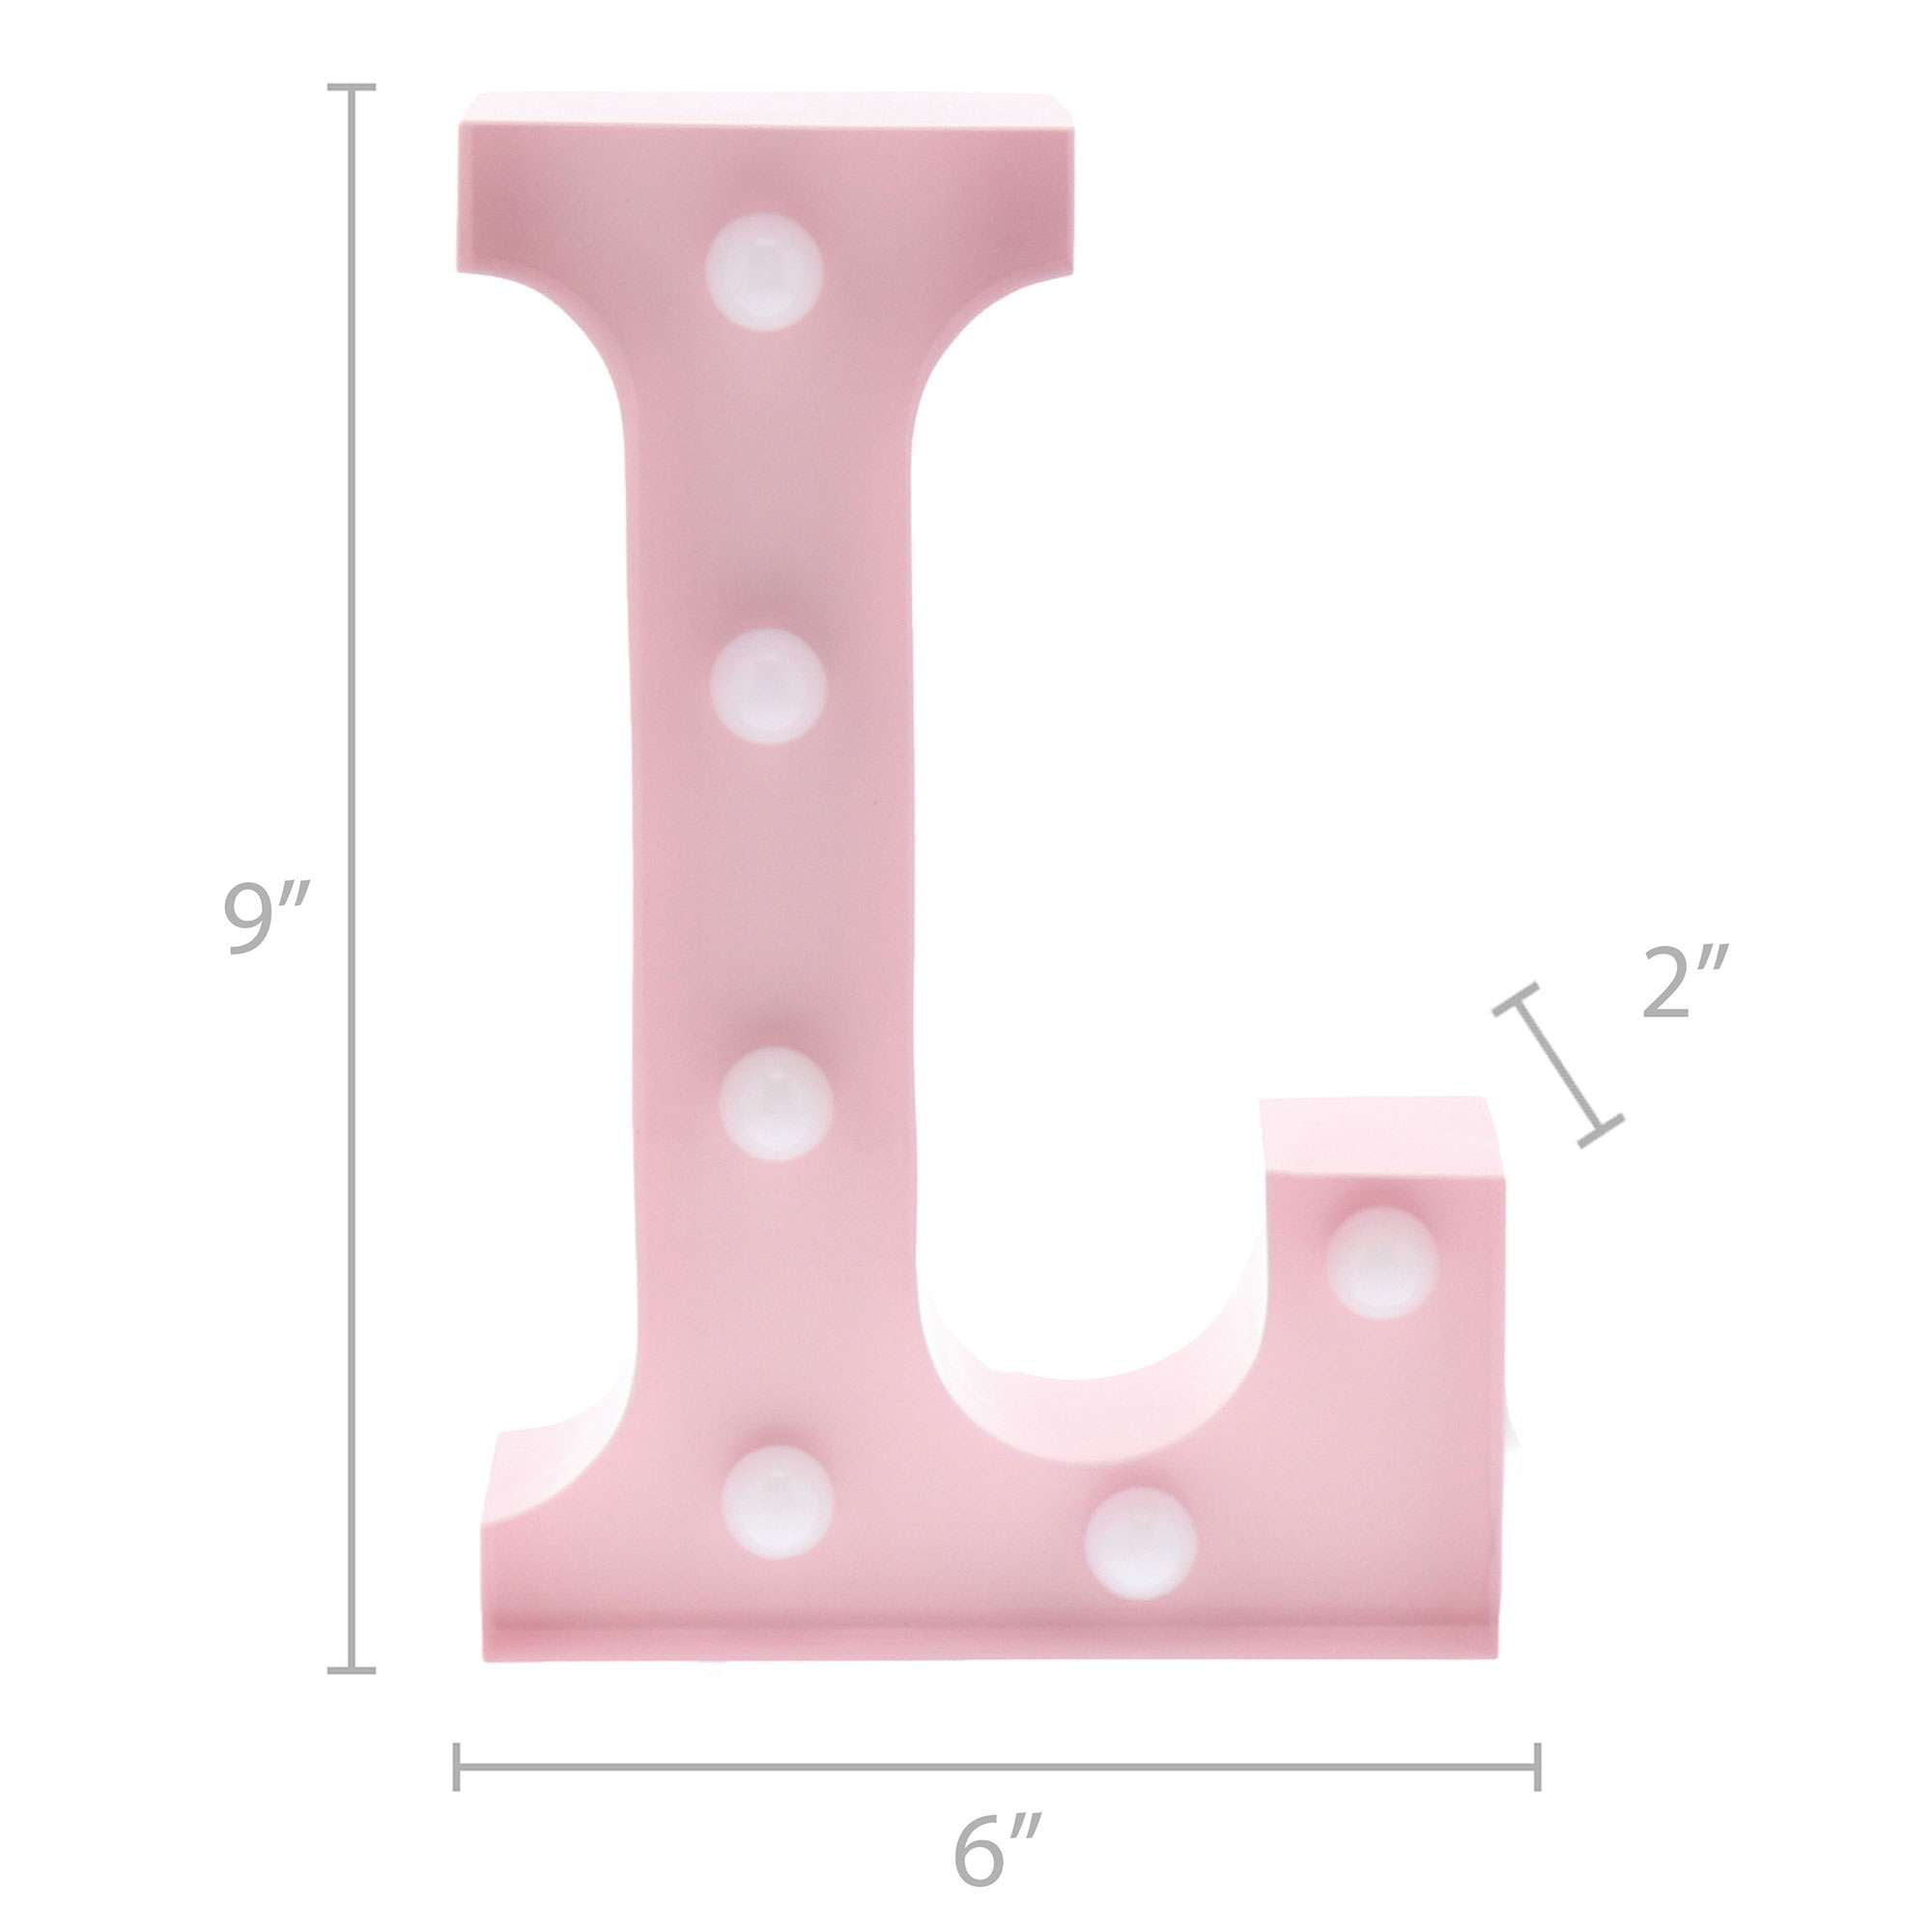 Home and Event Decoration 9” Barnyard Designs Metal Marquee Letter L Light Up Wall Initial Nursery Letter Baby Pink 